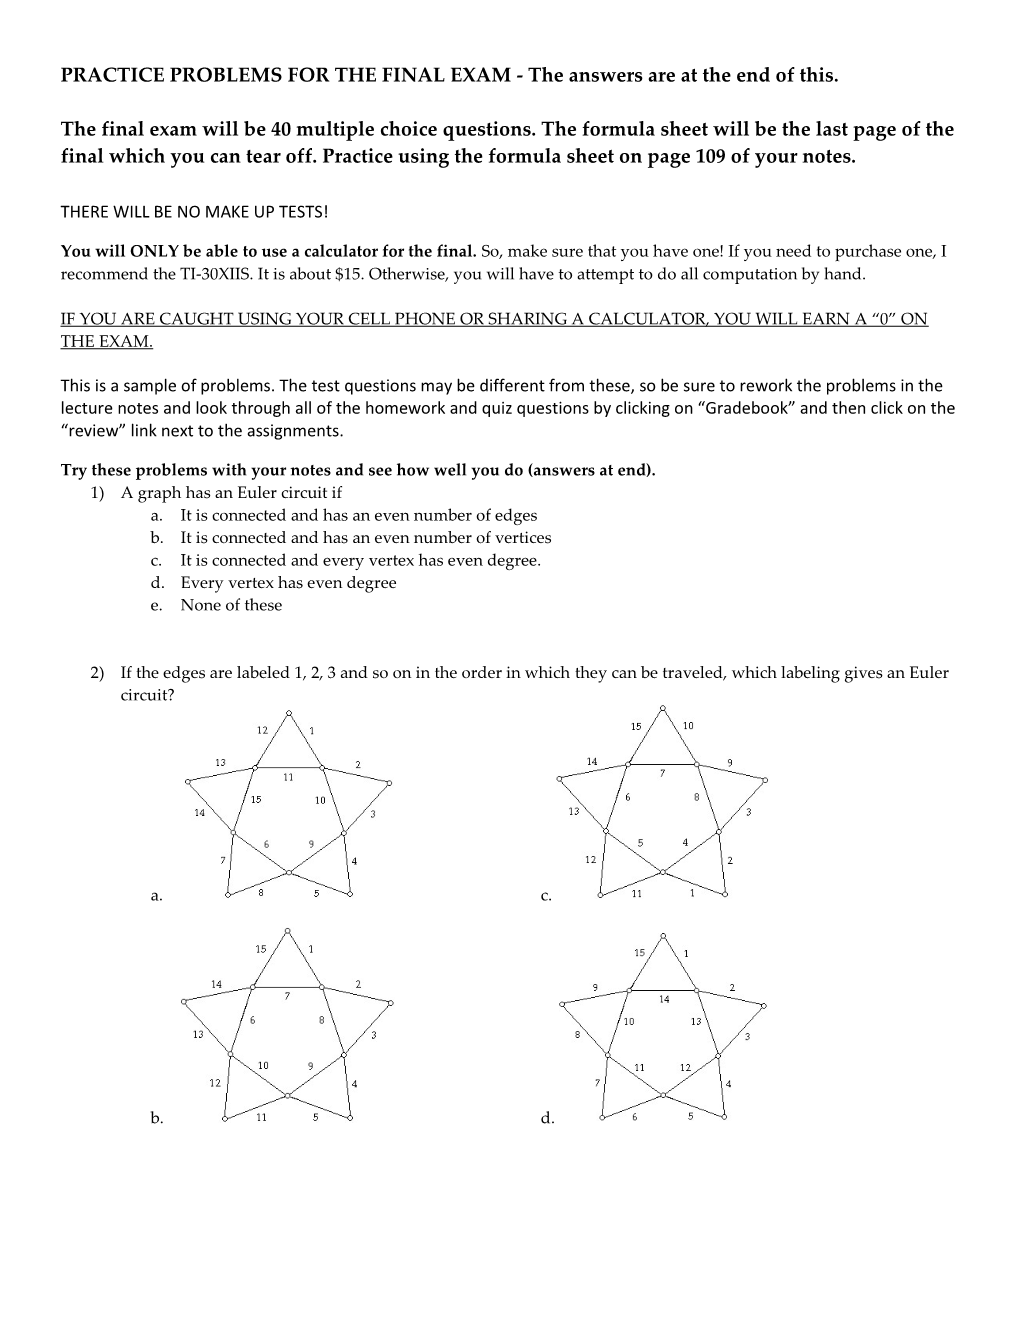 PRACTICE PROBLEMS for the FINAL EXAM - the Answers Are at the End of This